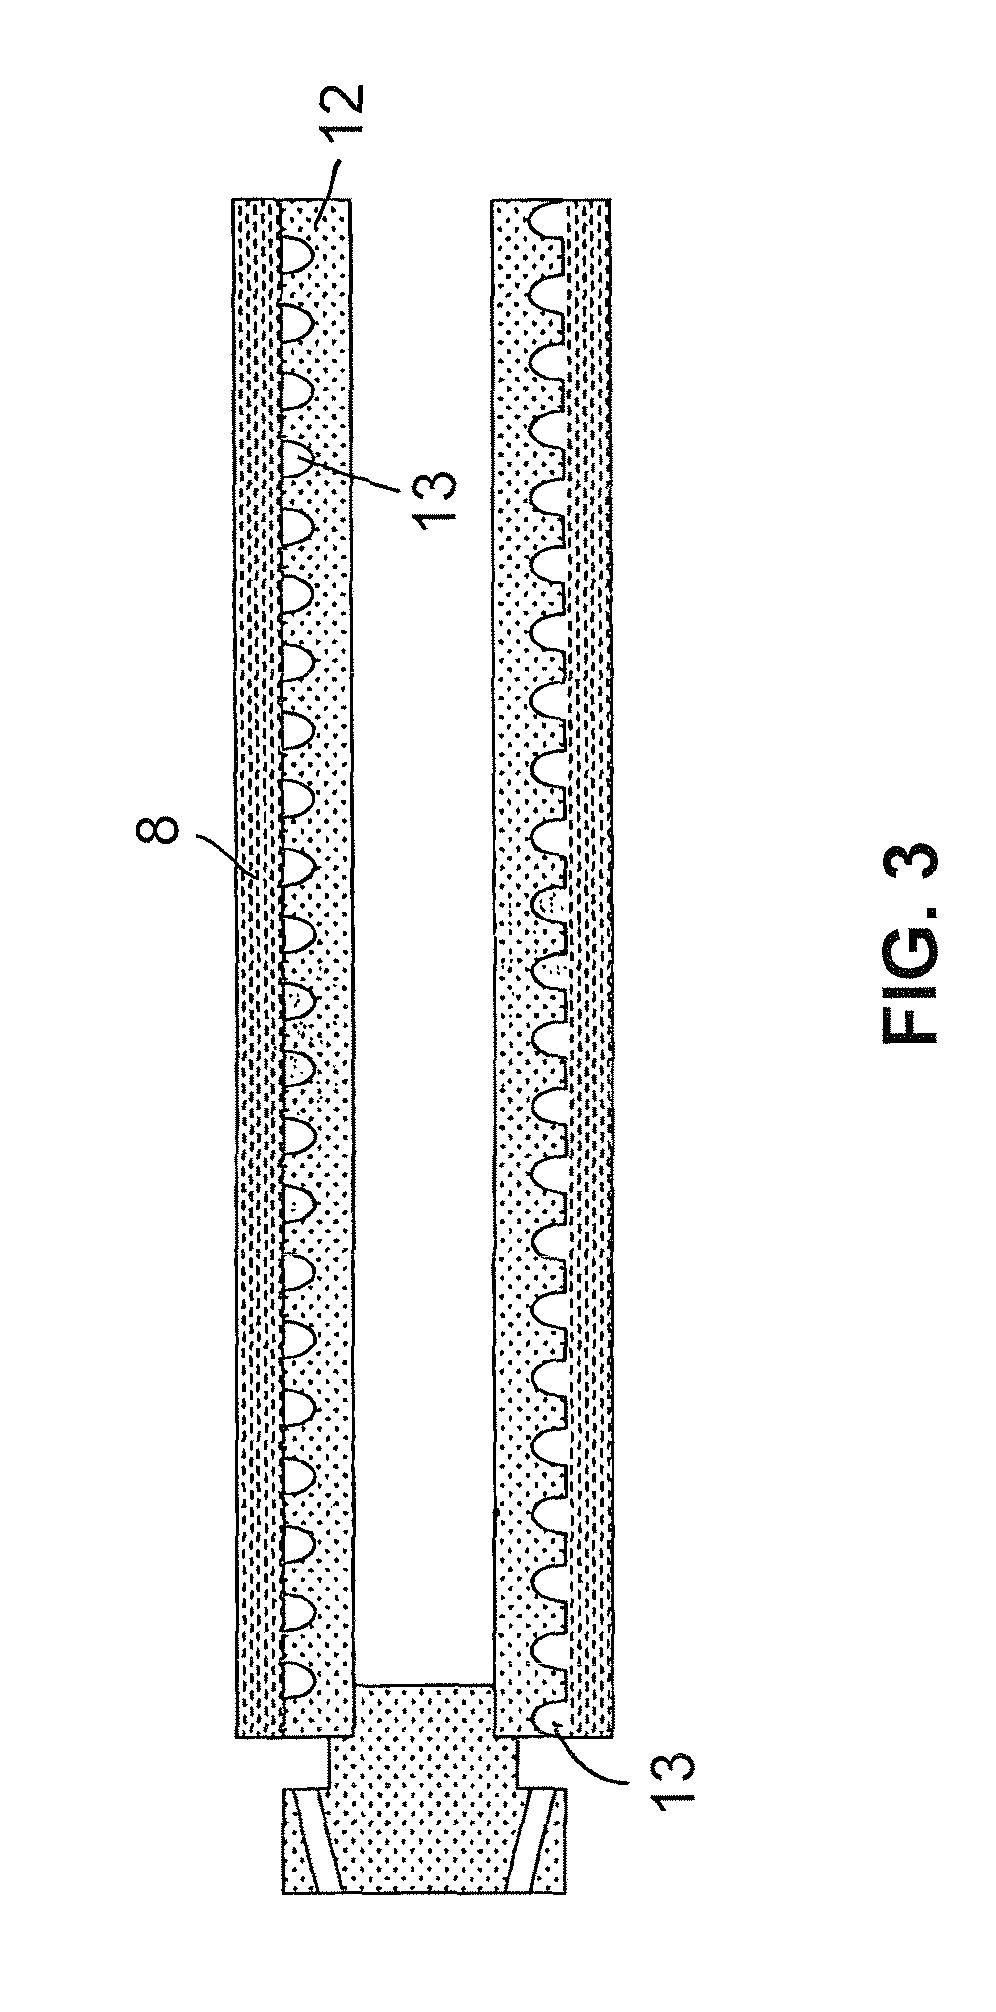 Valve for subsea hydrate inhibitor injection